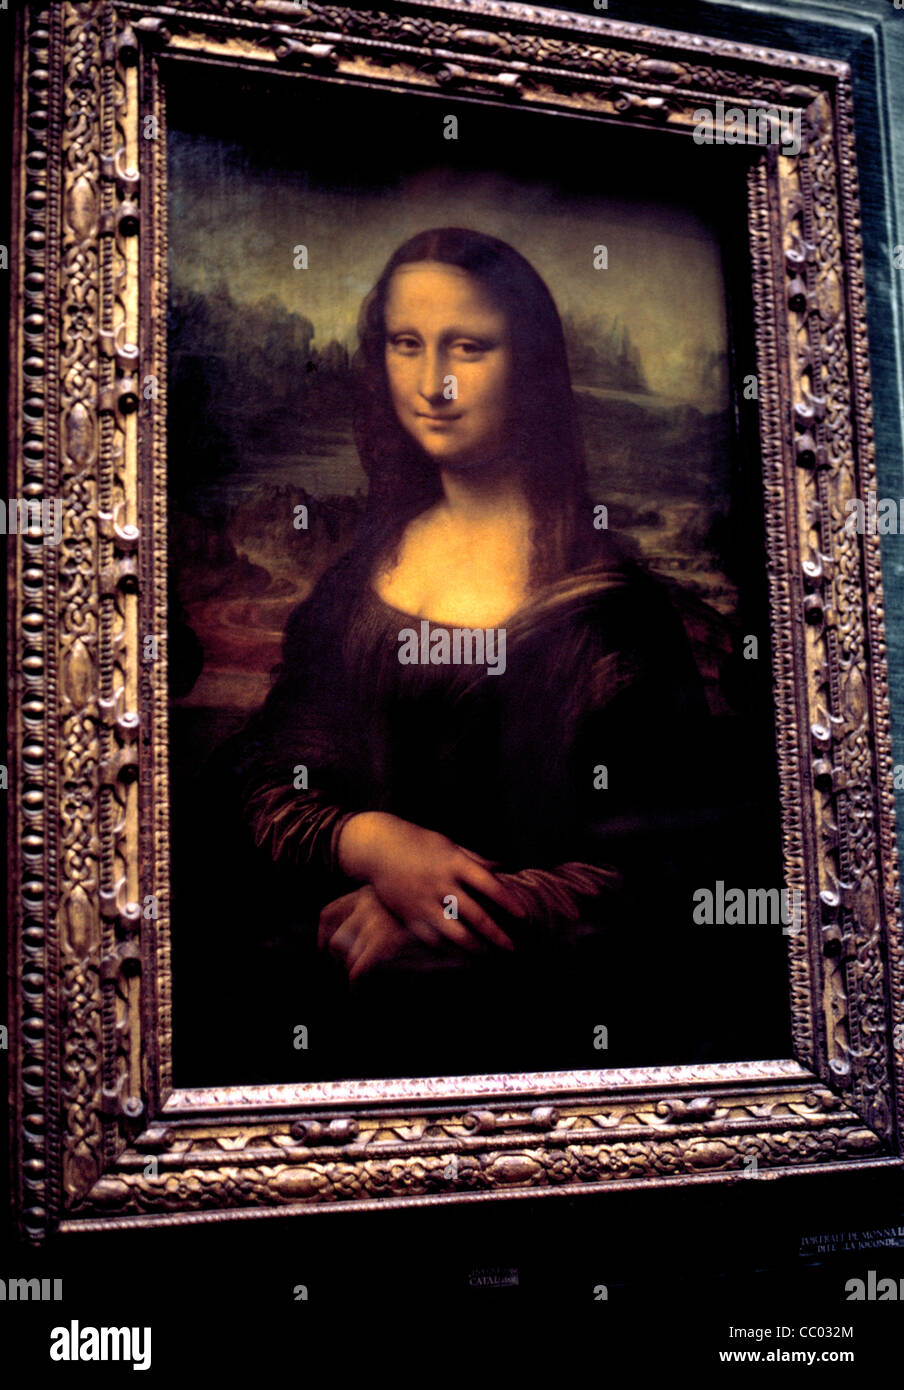 This world-famous portrait of Mona Lisa is an oil painting by Italian artist Leonardo da Vinci on display at the Louvre Museum in Paris, France. Stock Photo